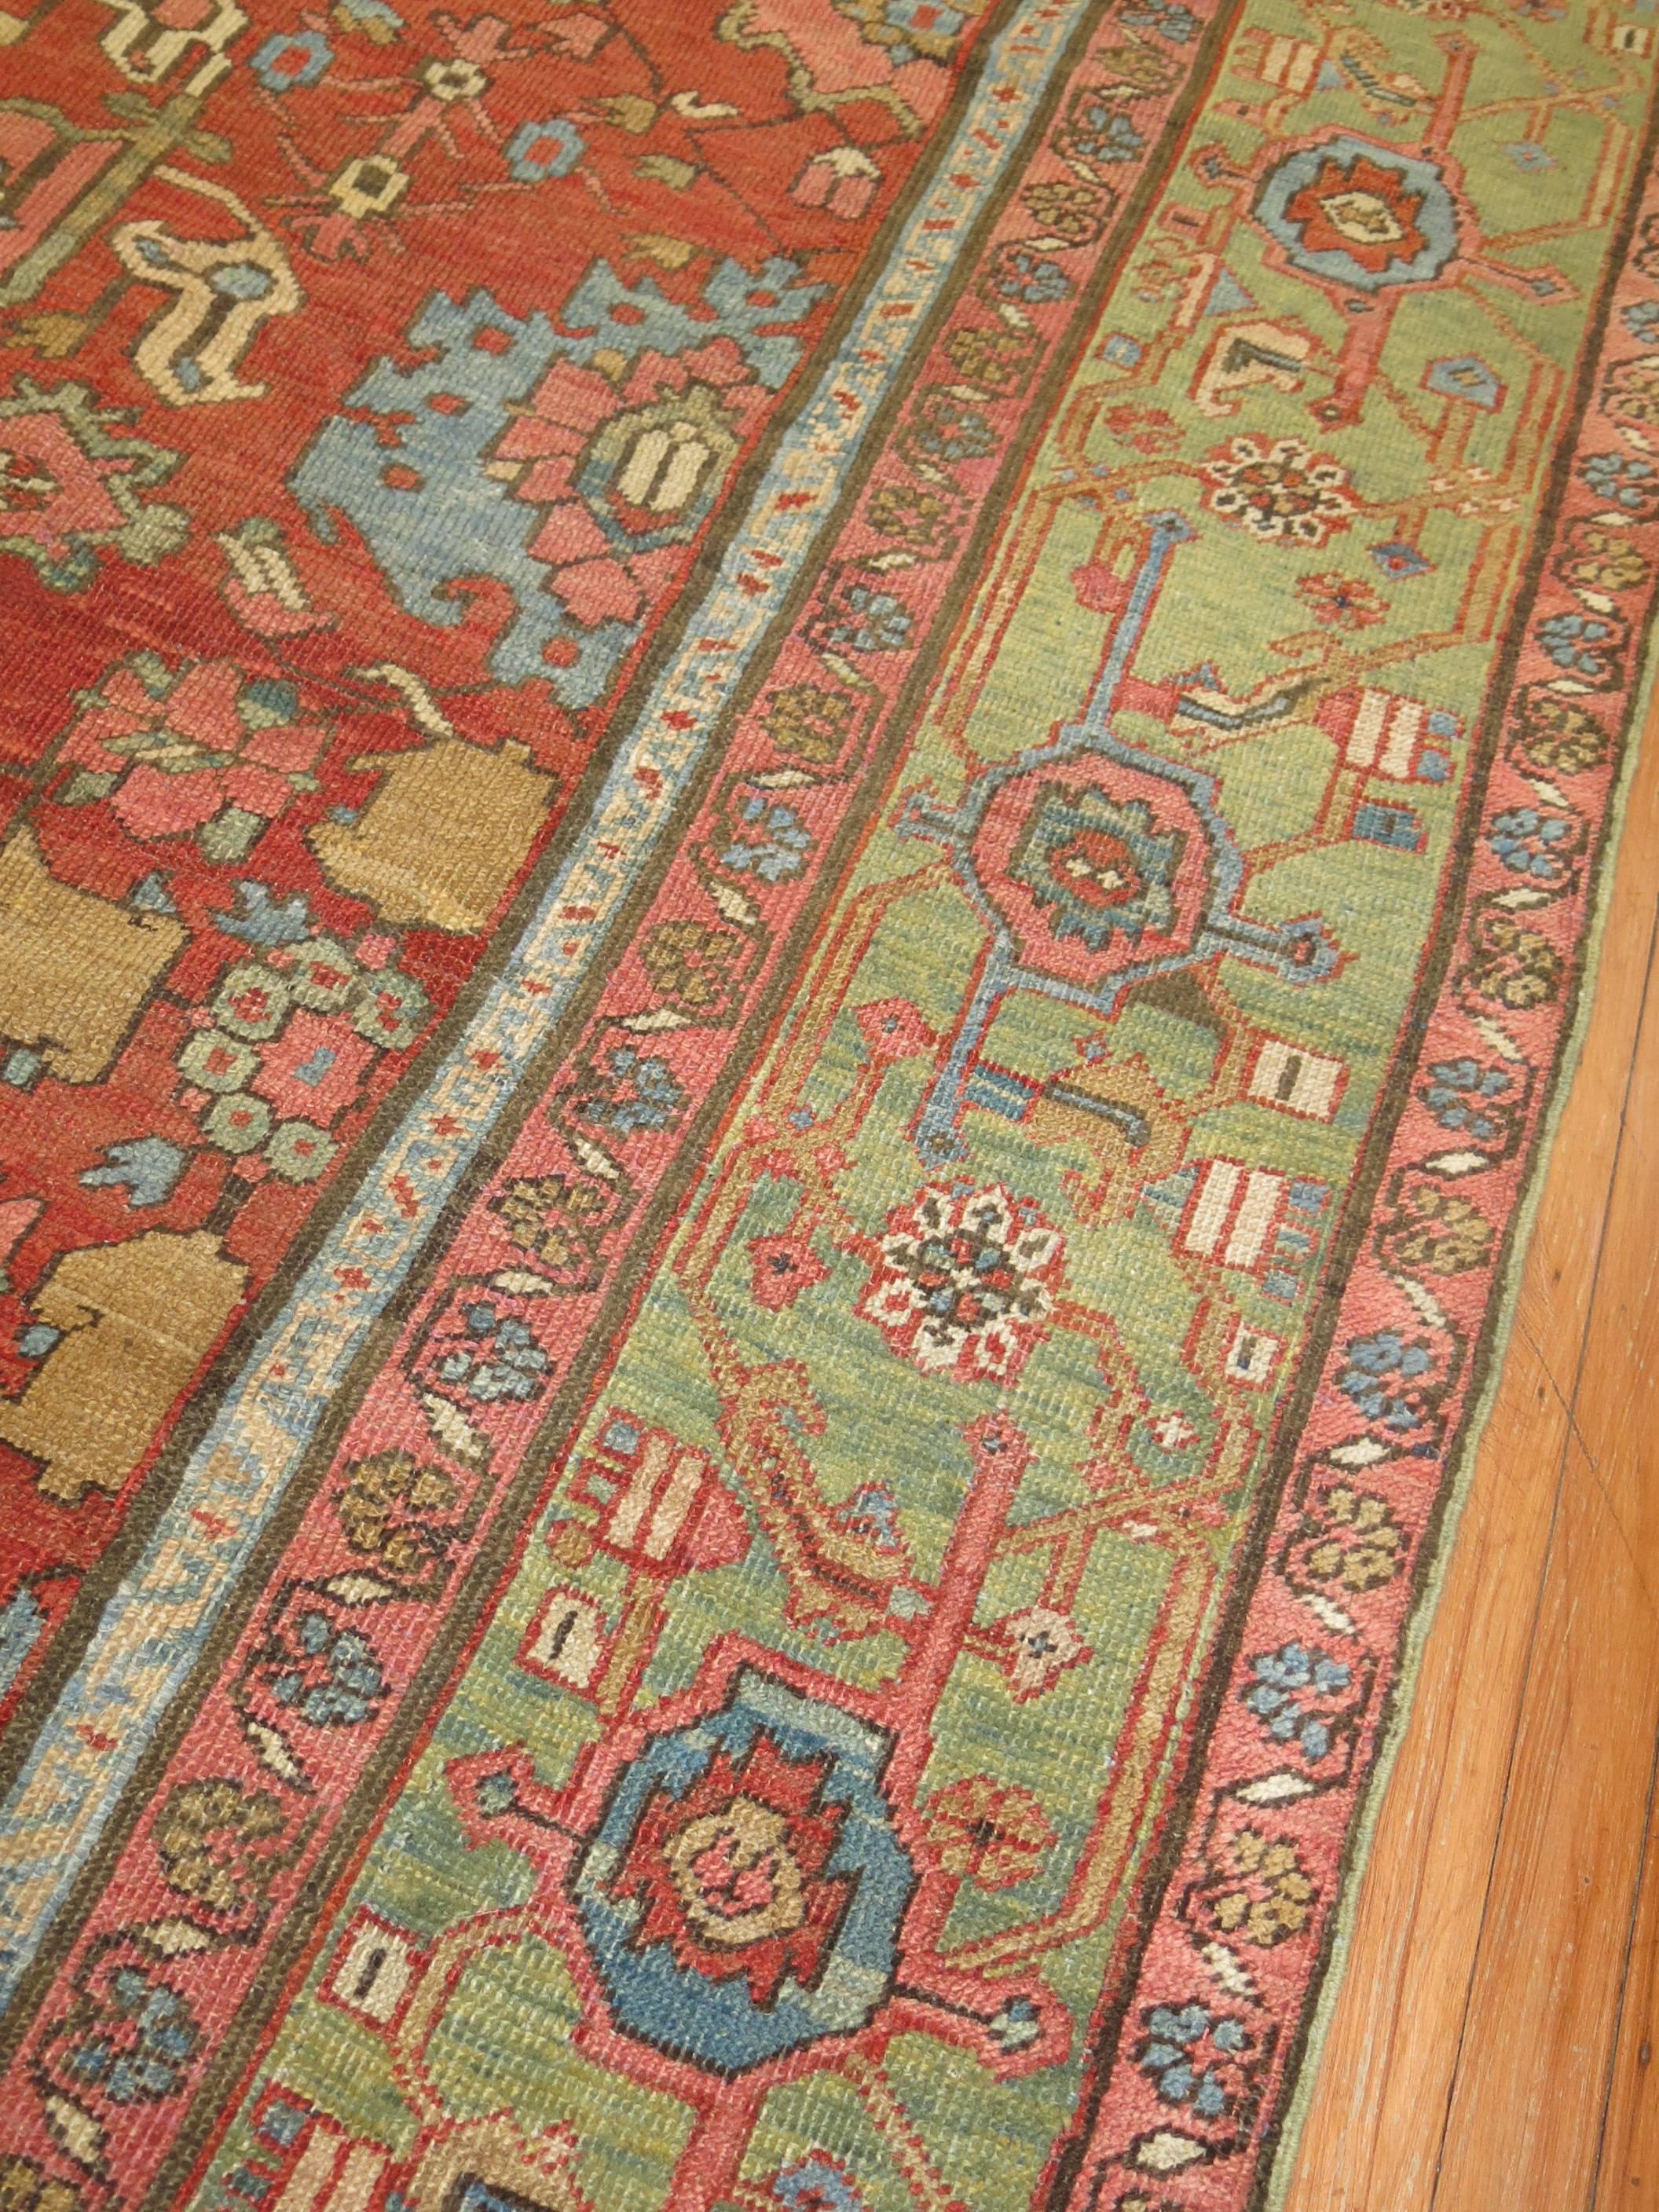 Colorful all-over design, early 20th century room size Heriz carpet. Orange-red field, light green border, accents of blue, terracotta, pink and camel.